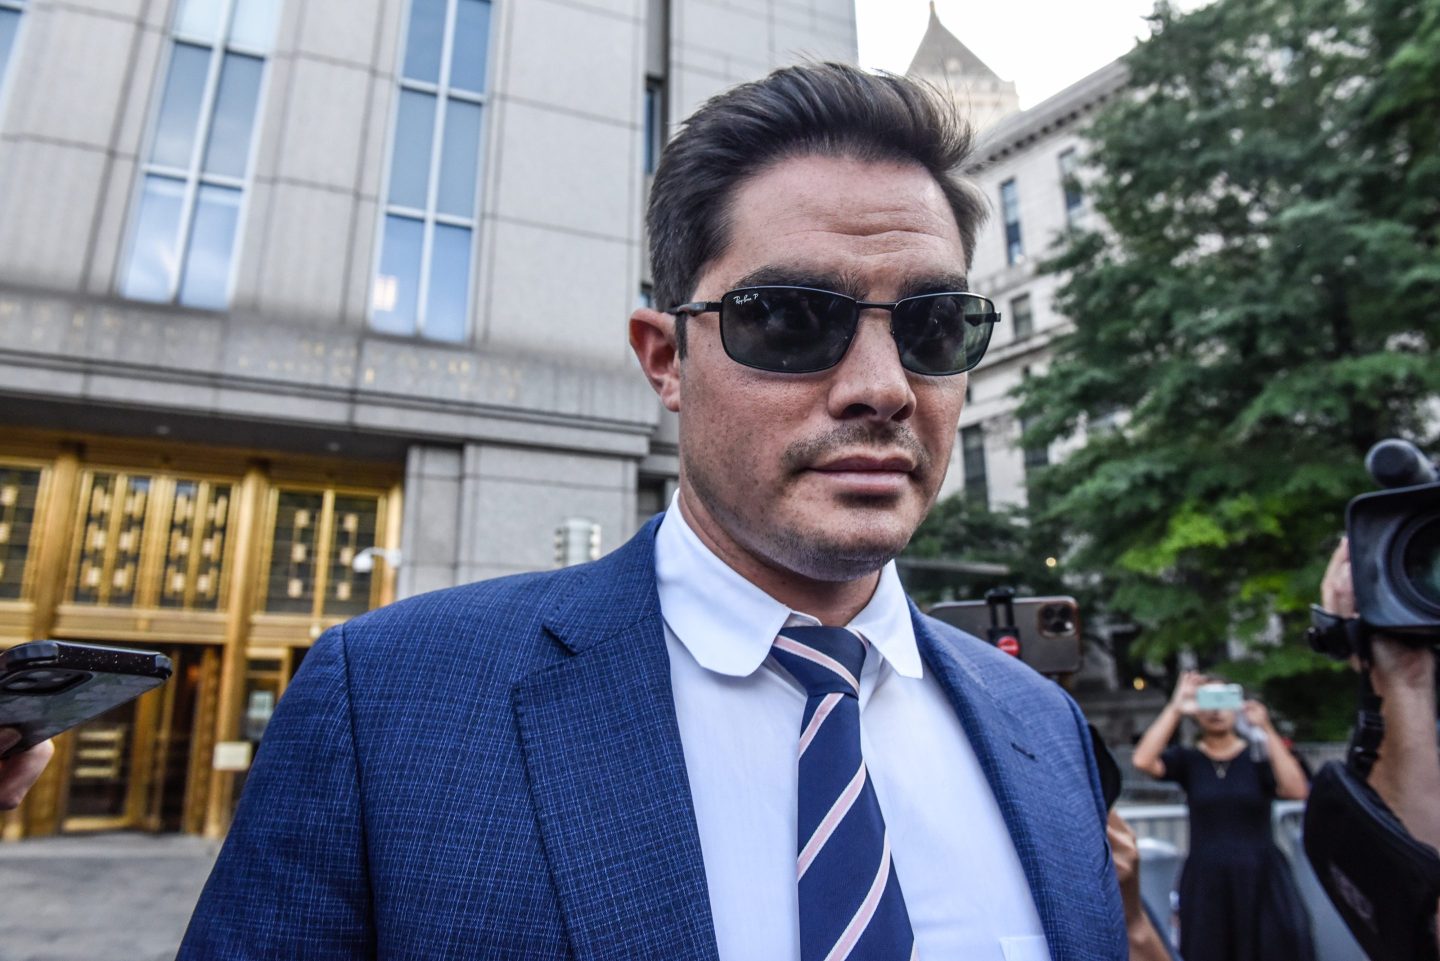 Ryan Salame, former co-chief executive officer of FTX Digital Markets Ltd., exits federal court in New York, US, on Thursday, Sept. 7, 2023. Salame pleaded guilty to criminal charges stemming from the collapse of the cryptocurrency exchange and agreed to surrender $1.55 billion in assets. Photographer: Stephanie Keith/Bloomberg via Getty Images